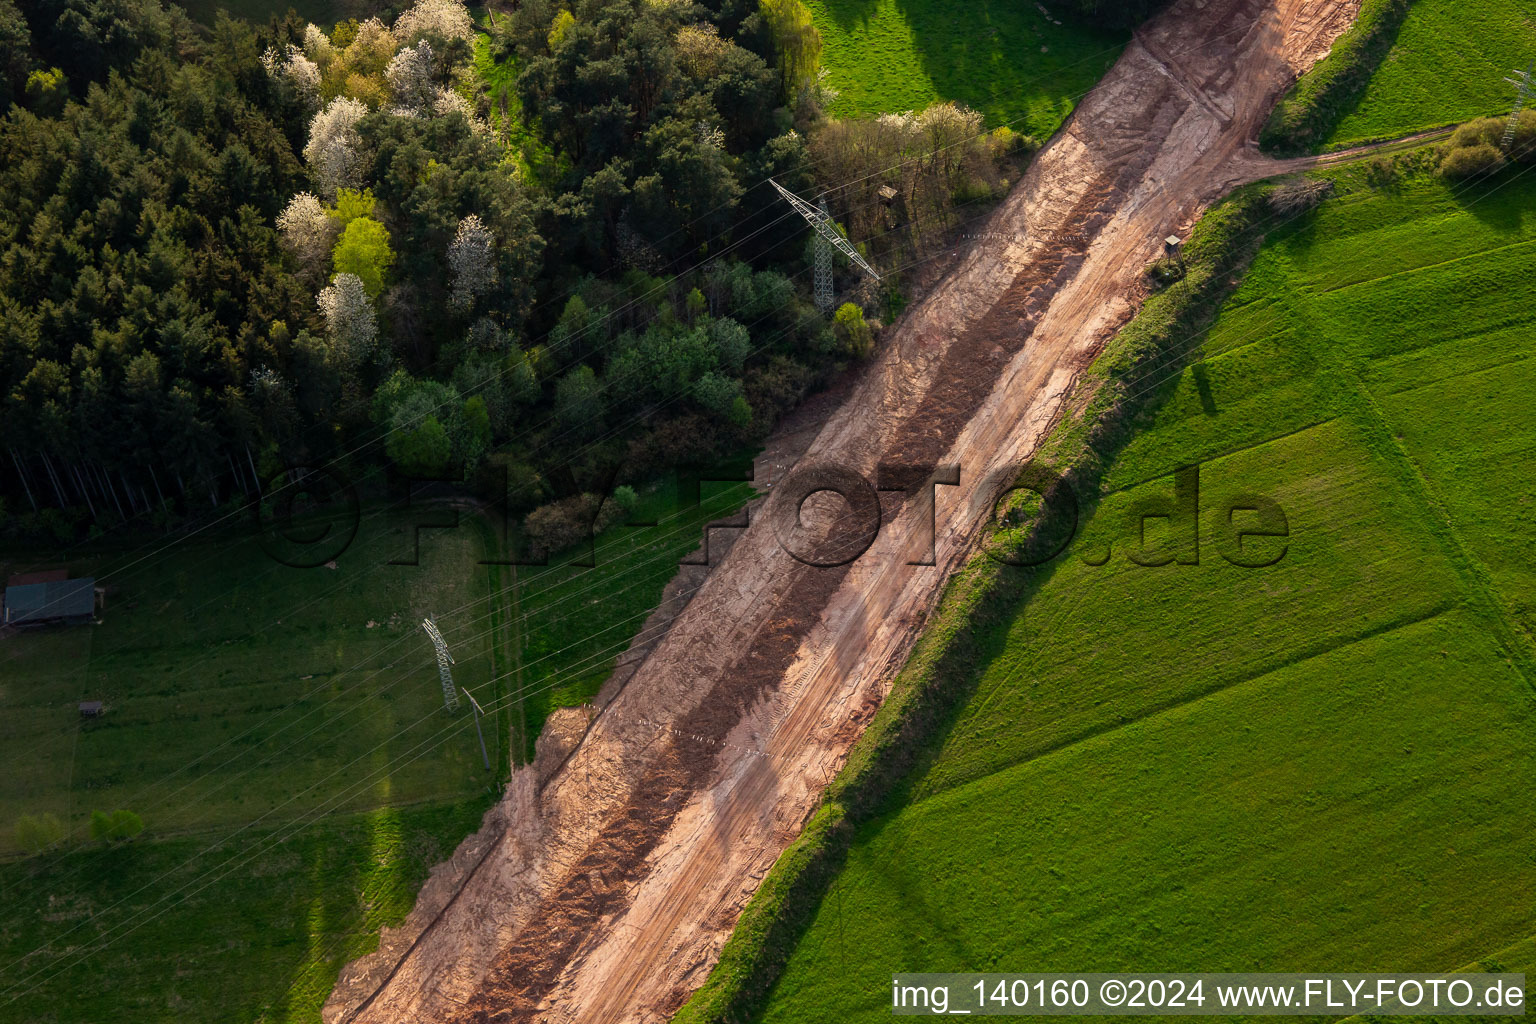 Path through the Palatinate Forest to rebuild the 51 km section of the Trans-Europe Natural Gas Pipeline (TENP-III from the Netherlands to Switzerland) between Mittelbrunn and Klingenmünster in Spirkelbach in the state Rhineland-Palatinate, Germany